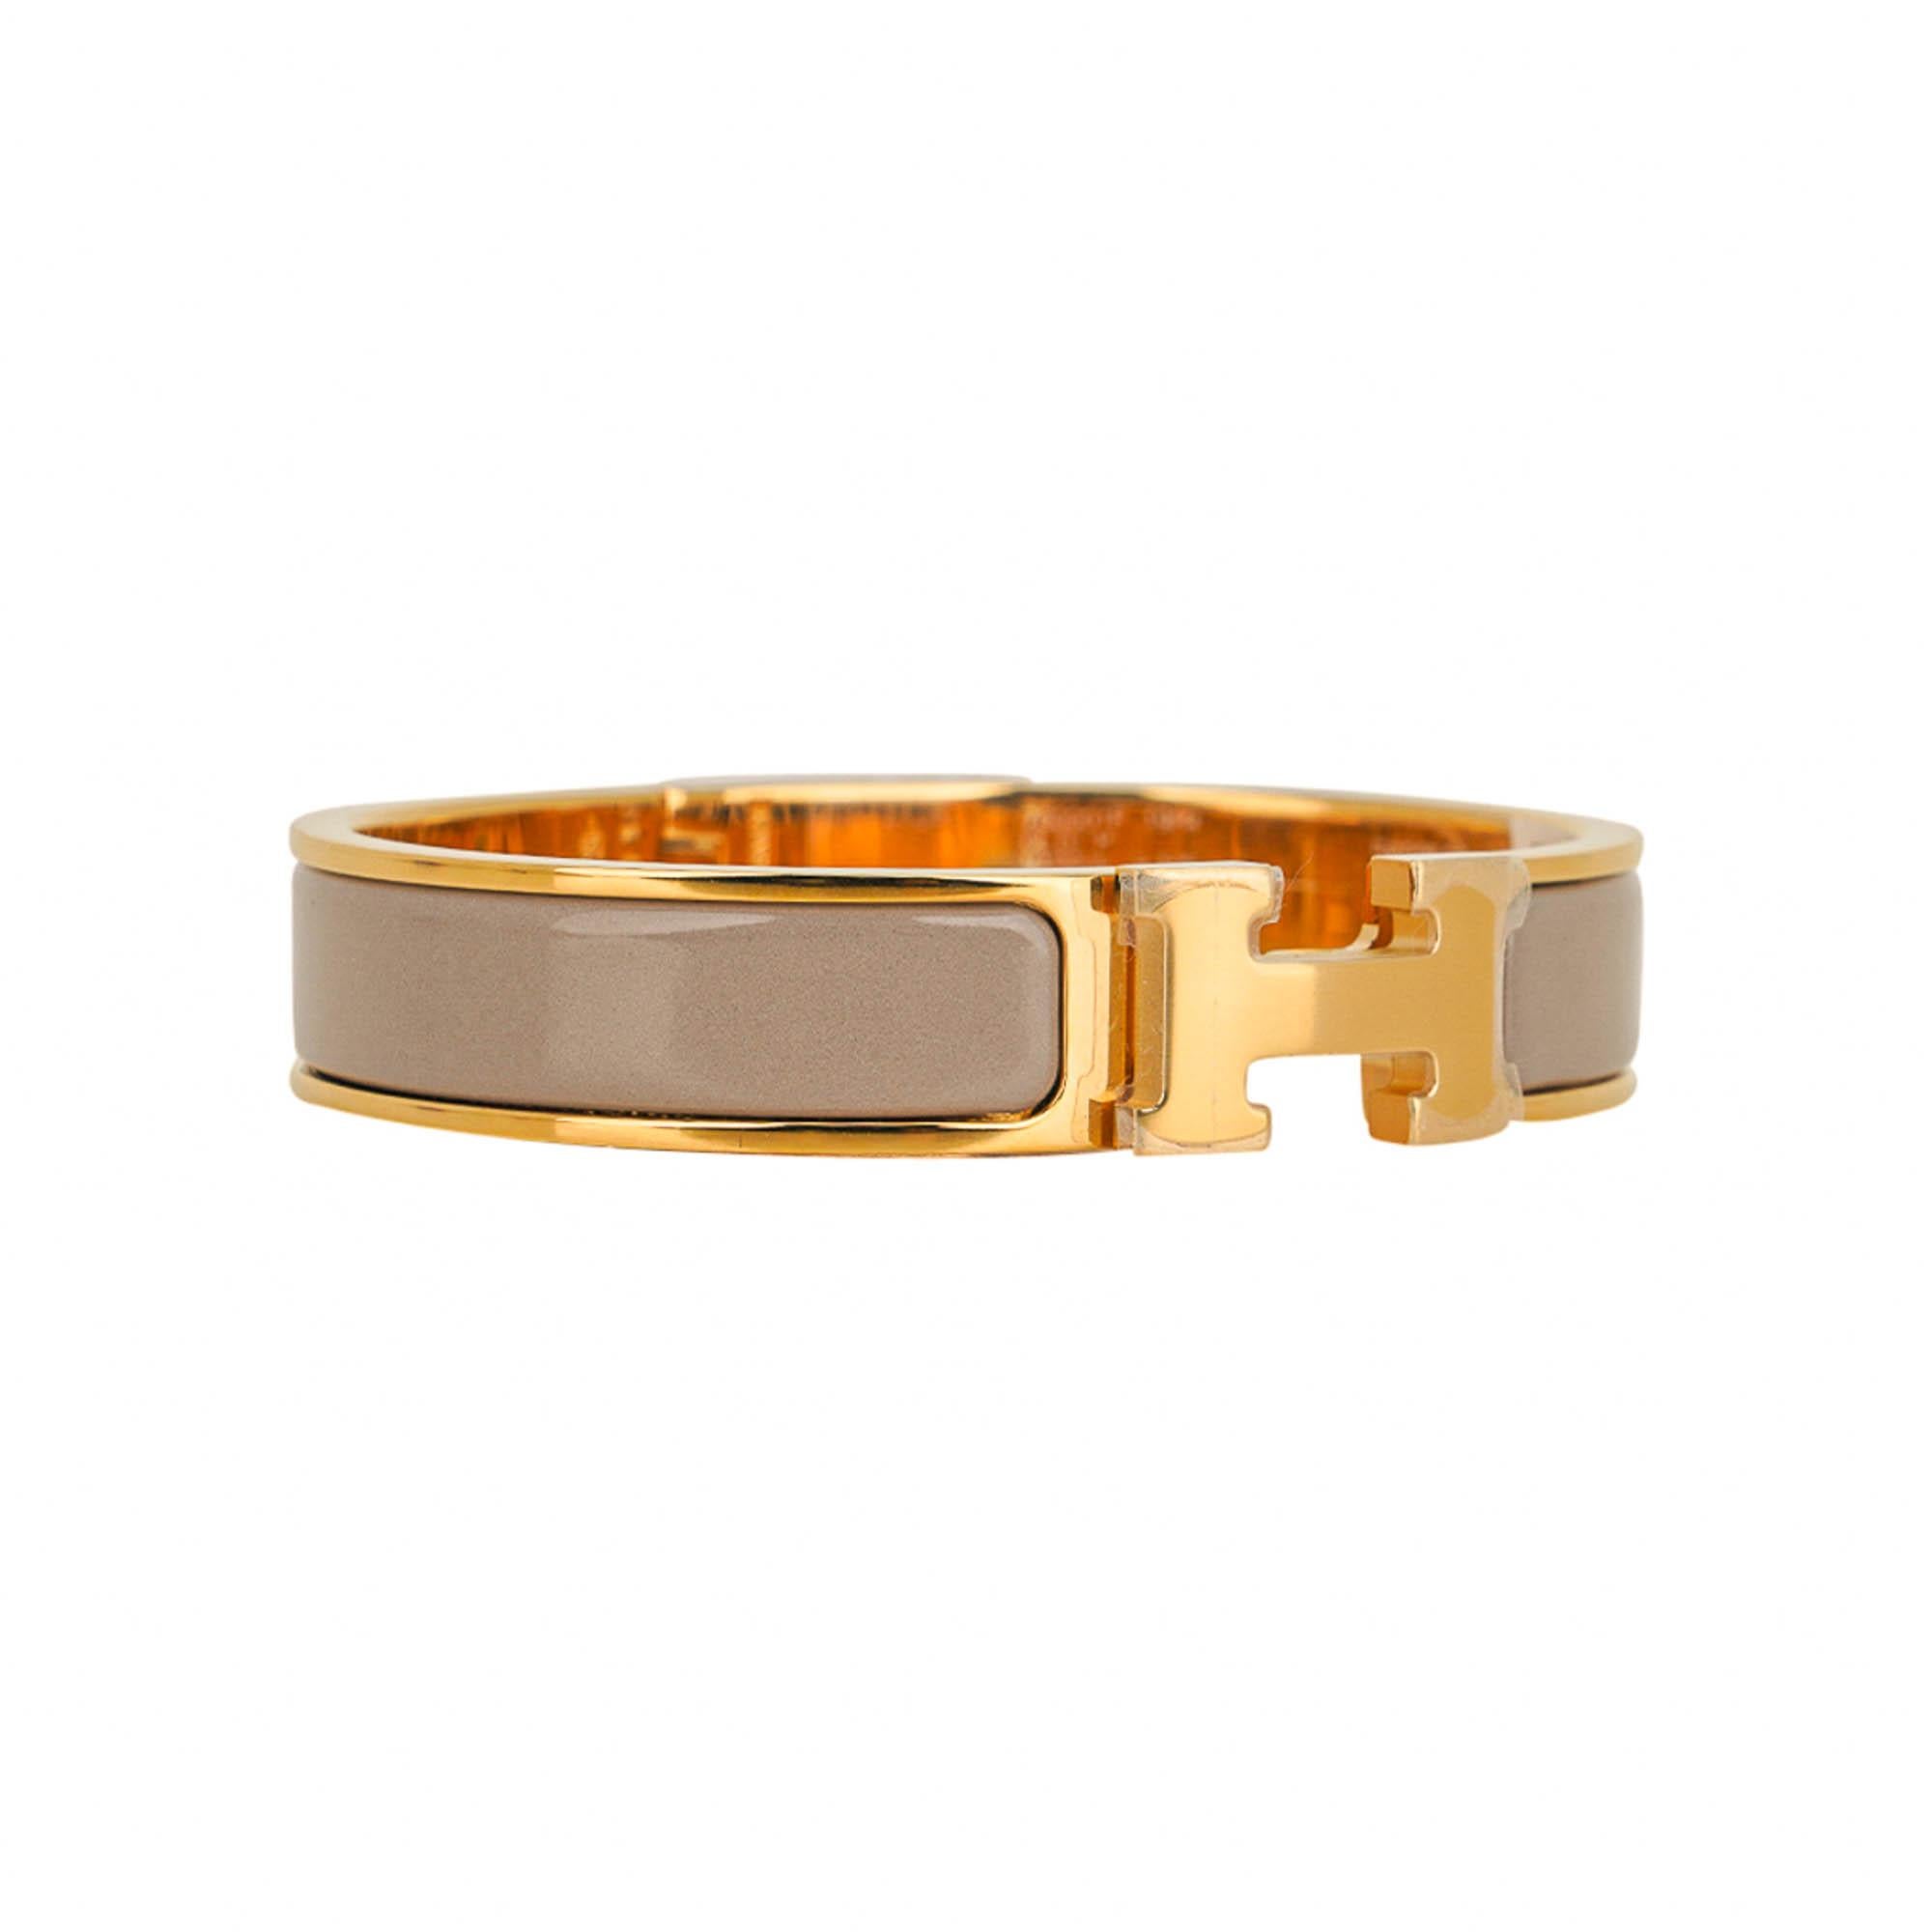 Hermes Marron Glace Clic H Narrow Enamel Bracelet Gold PM In New Condition For Sale In Miami, FL